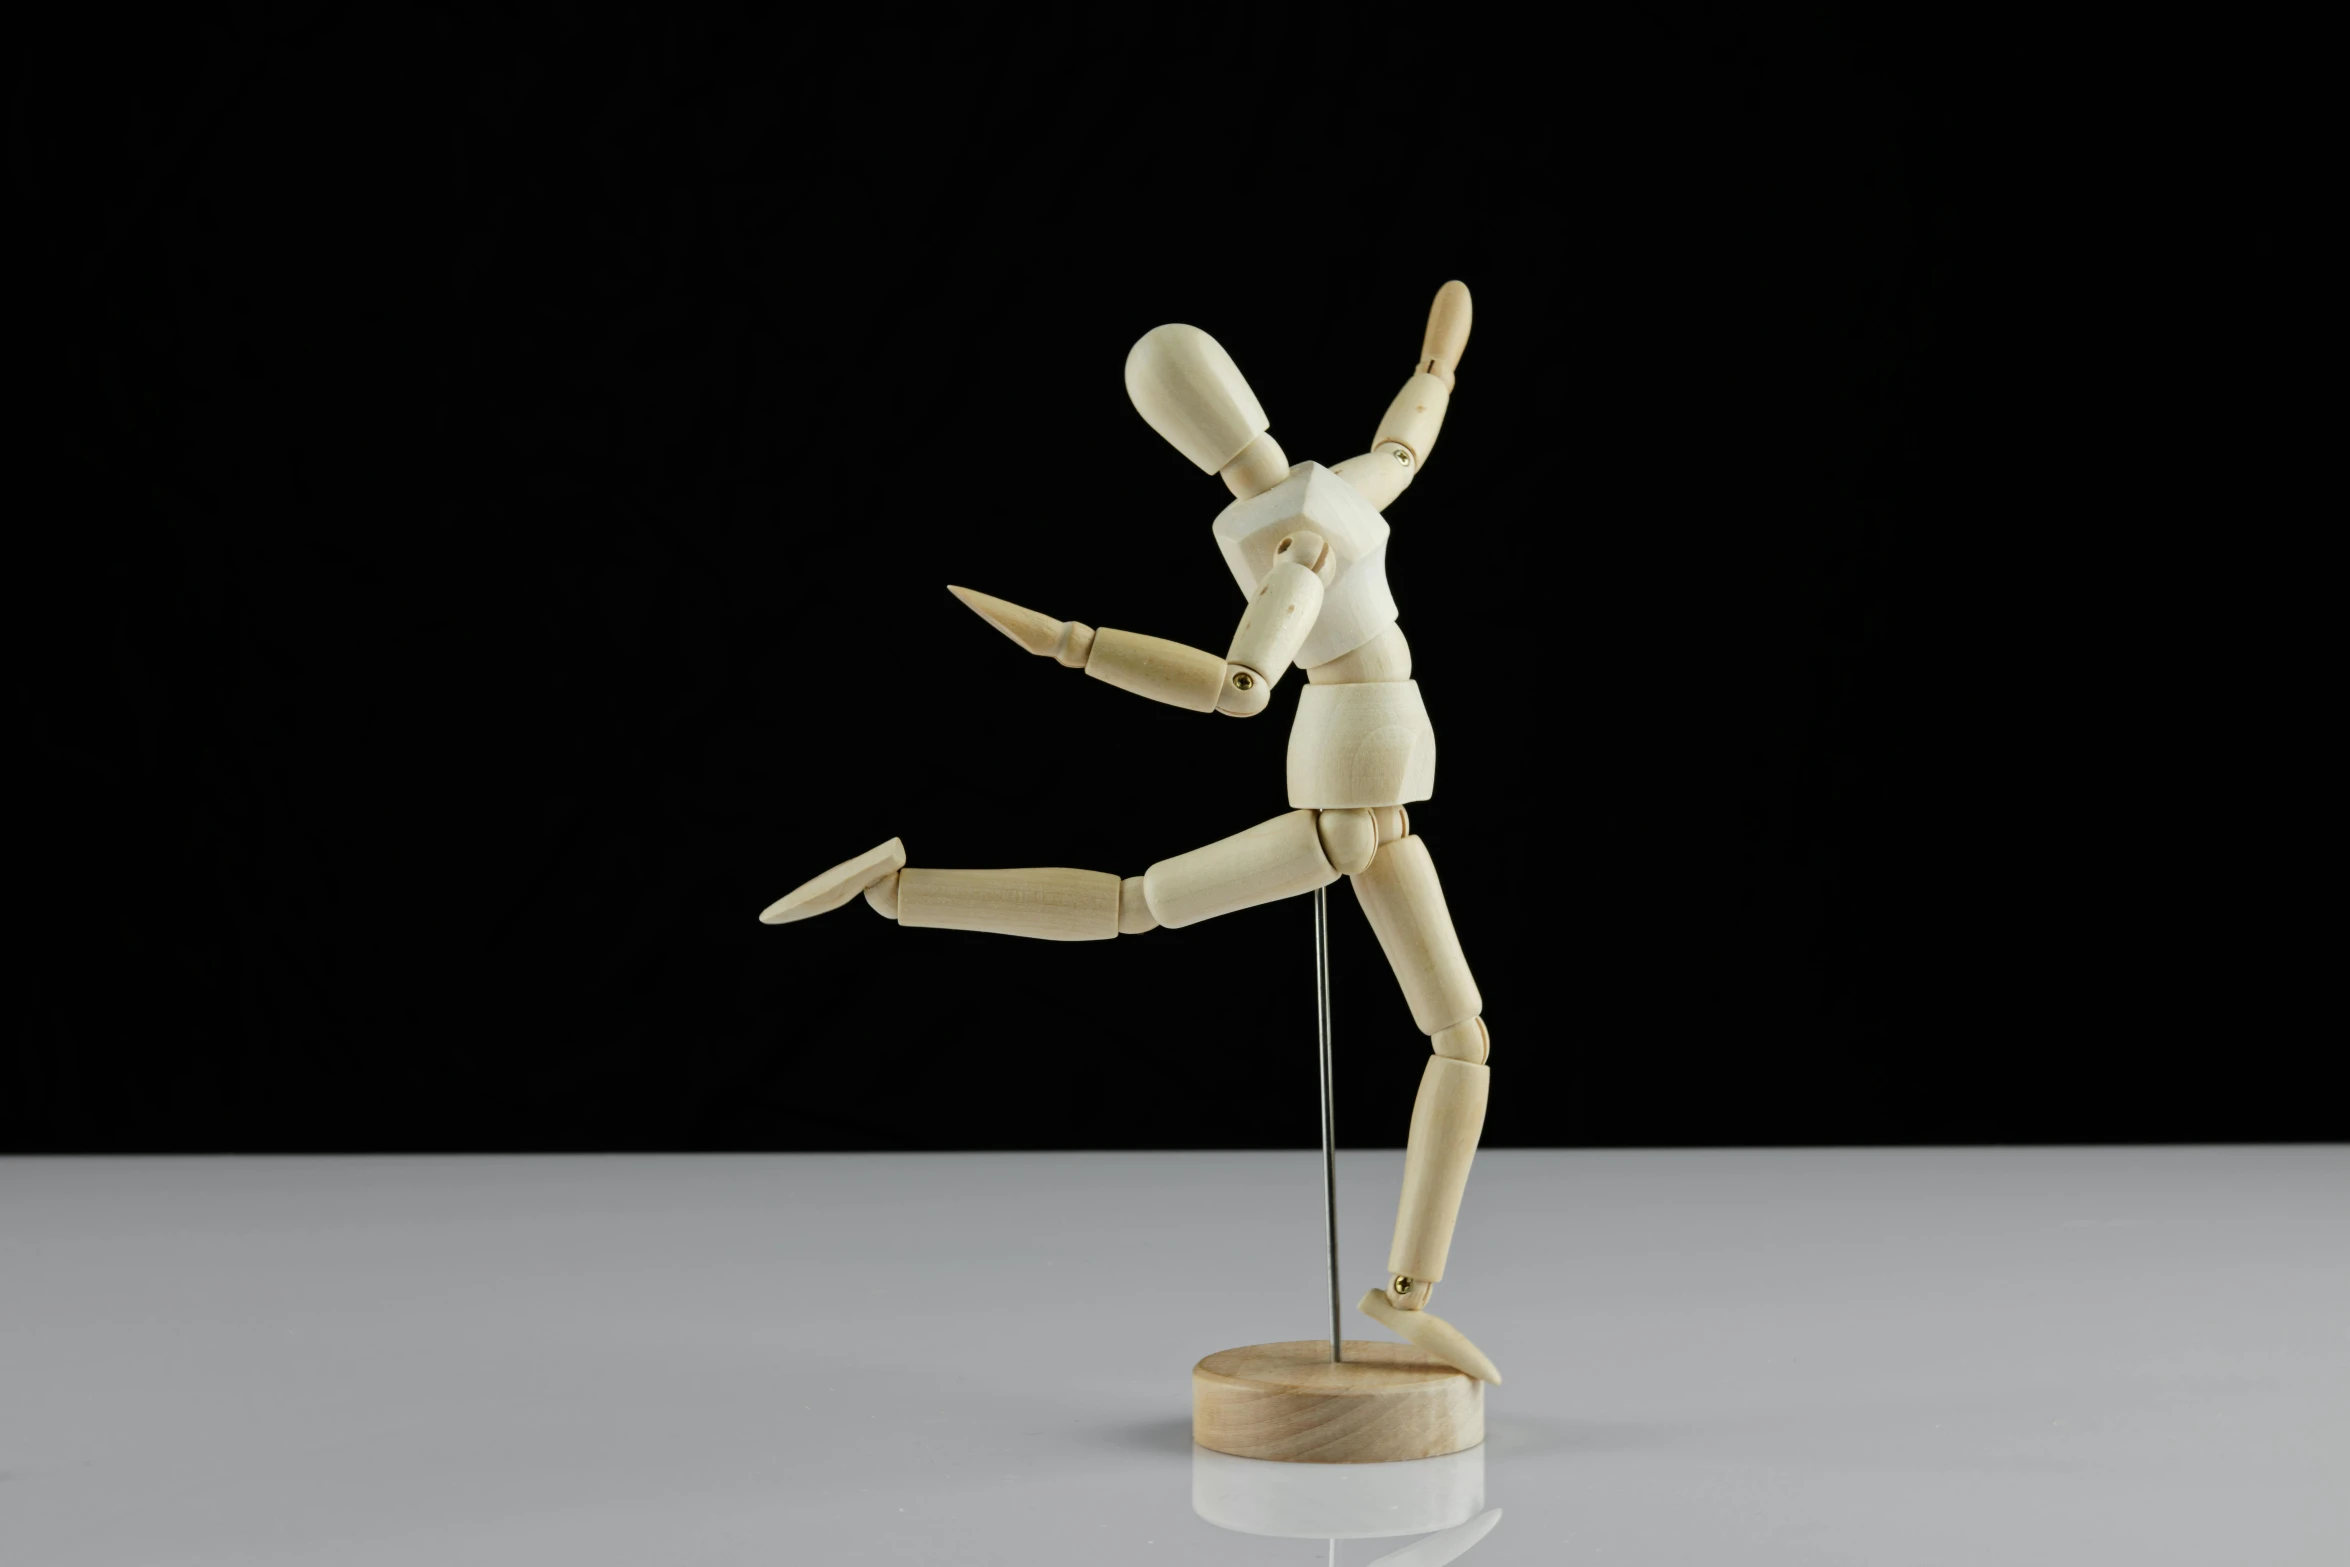 a wooden mannequin standing on a stand, inspired by James Wood, dynamic dancing pose, 1 figure only, fully posable, with a wooden stuff